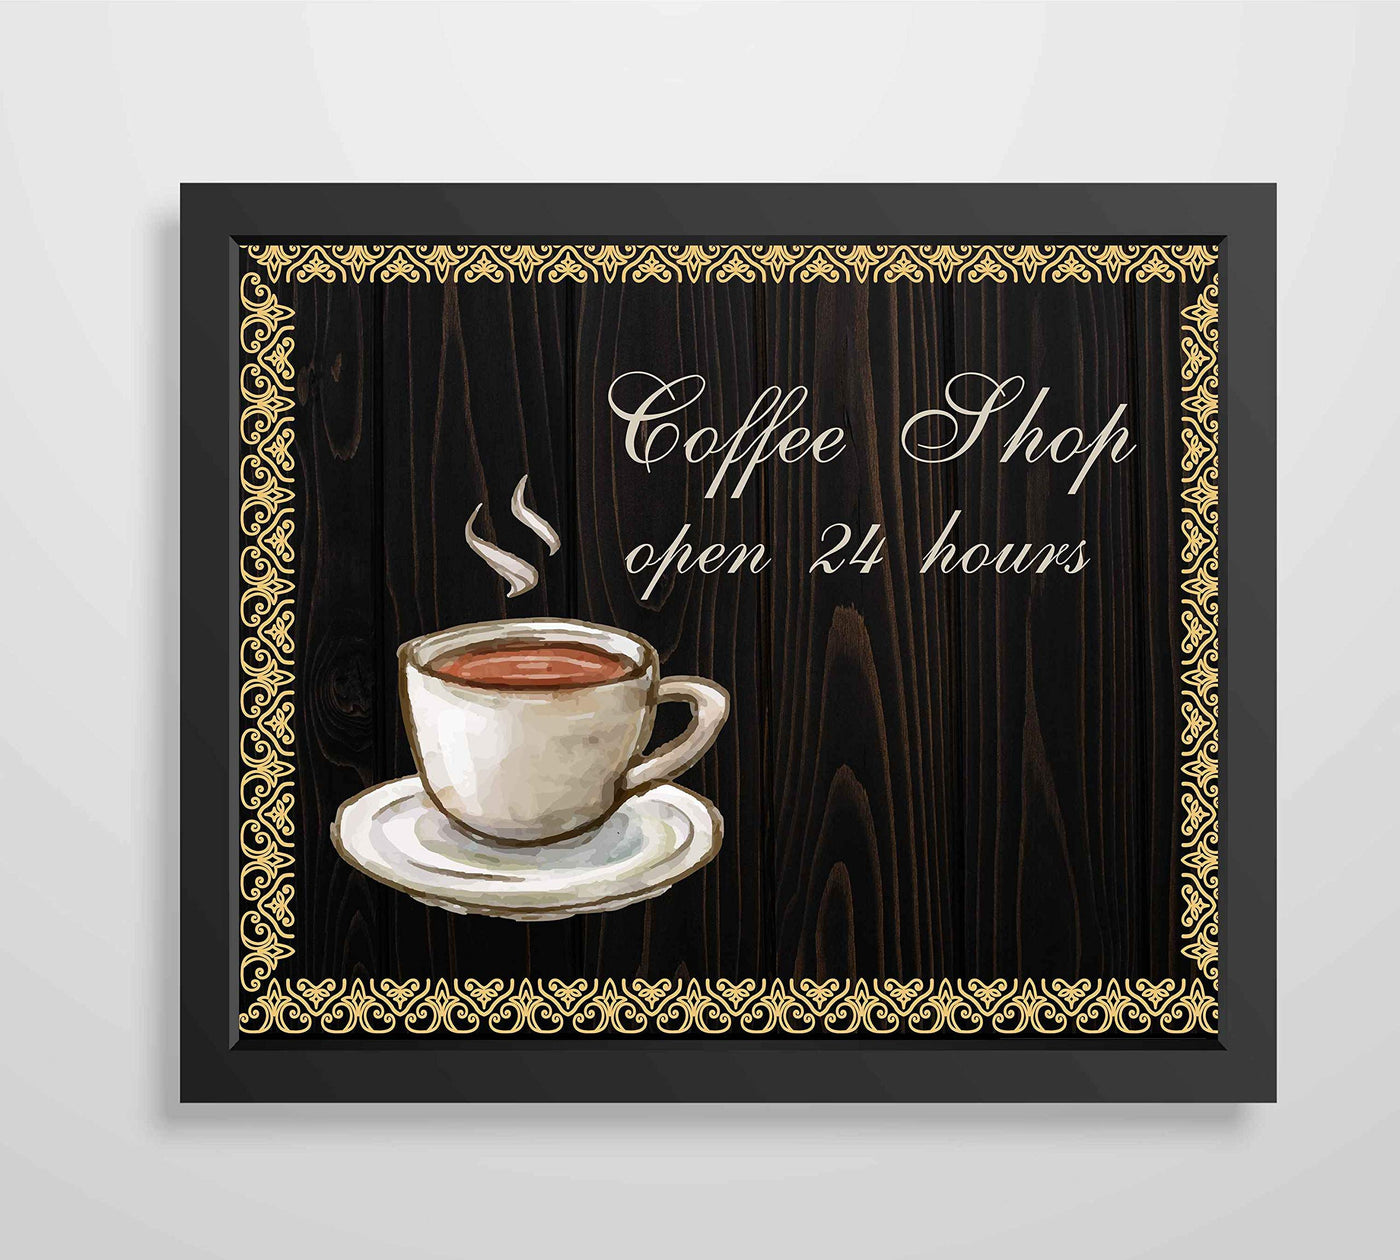 Coffee Shop-Open 24 Hours Vintage Coffee Wall Art Sign -10 x 8" Retro Poster Print-Ready to Frame. Perfect Wall Decor for Home-Kitchen-Farmhouse-Office-Cafe-Java Bar. Great Gift for Coffee Lovers!